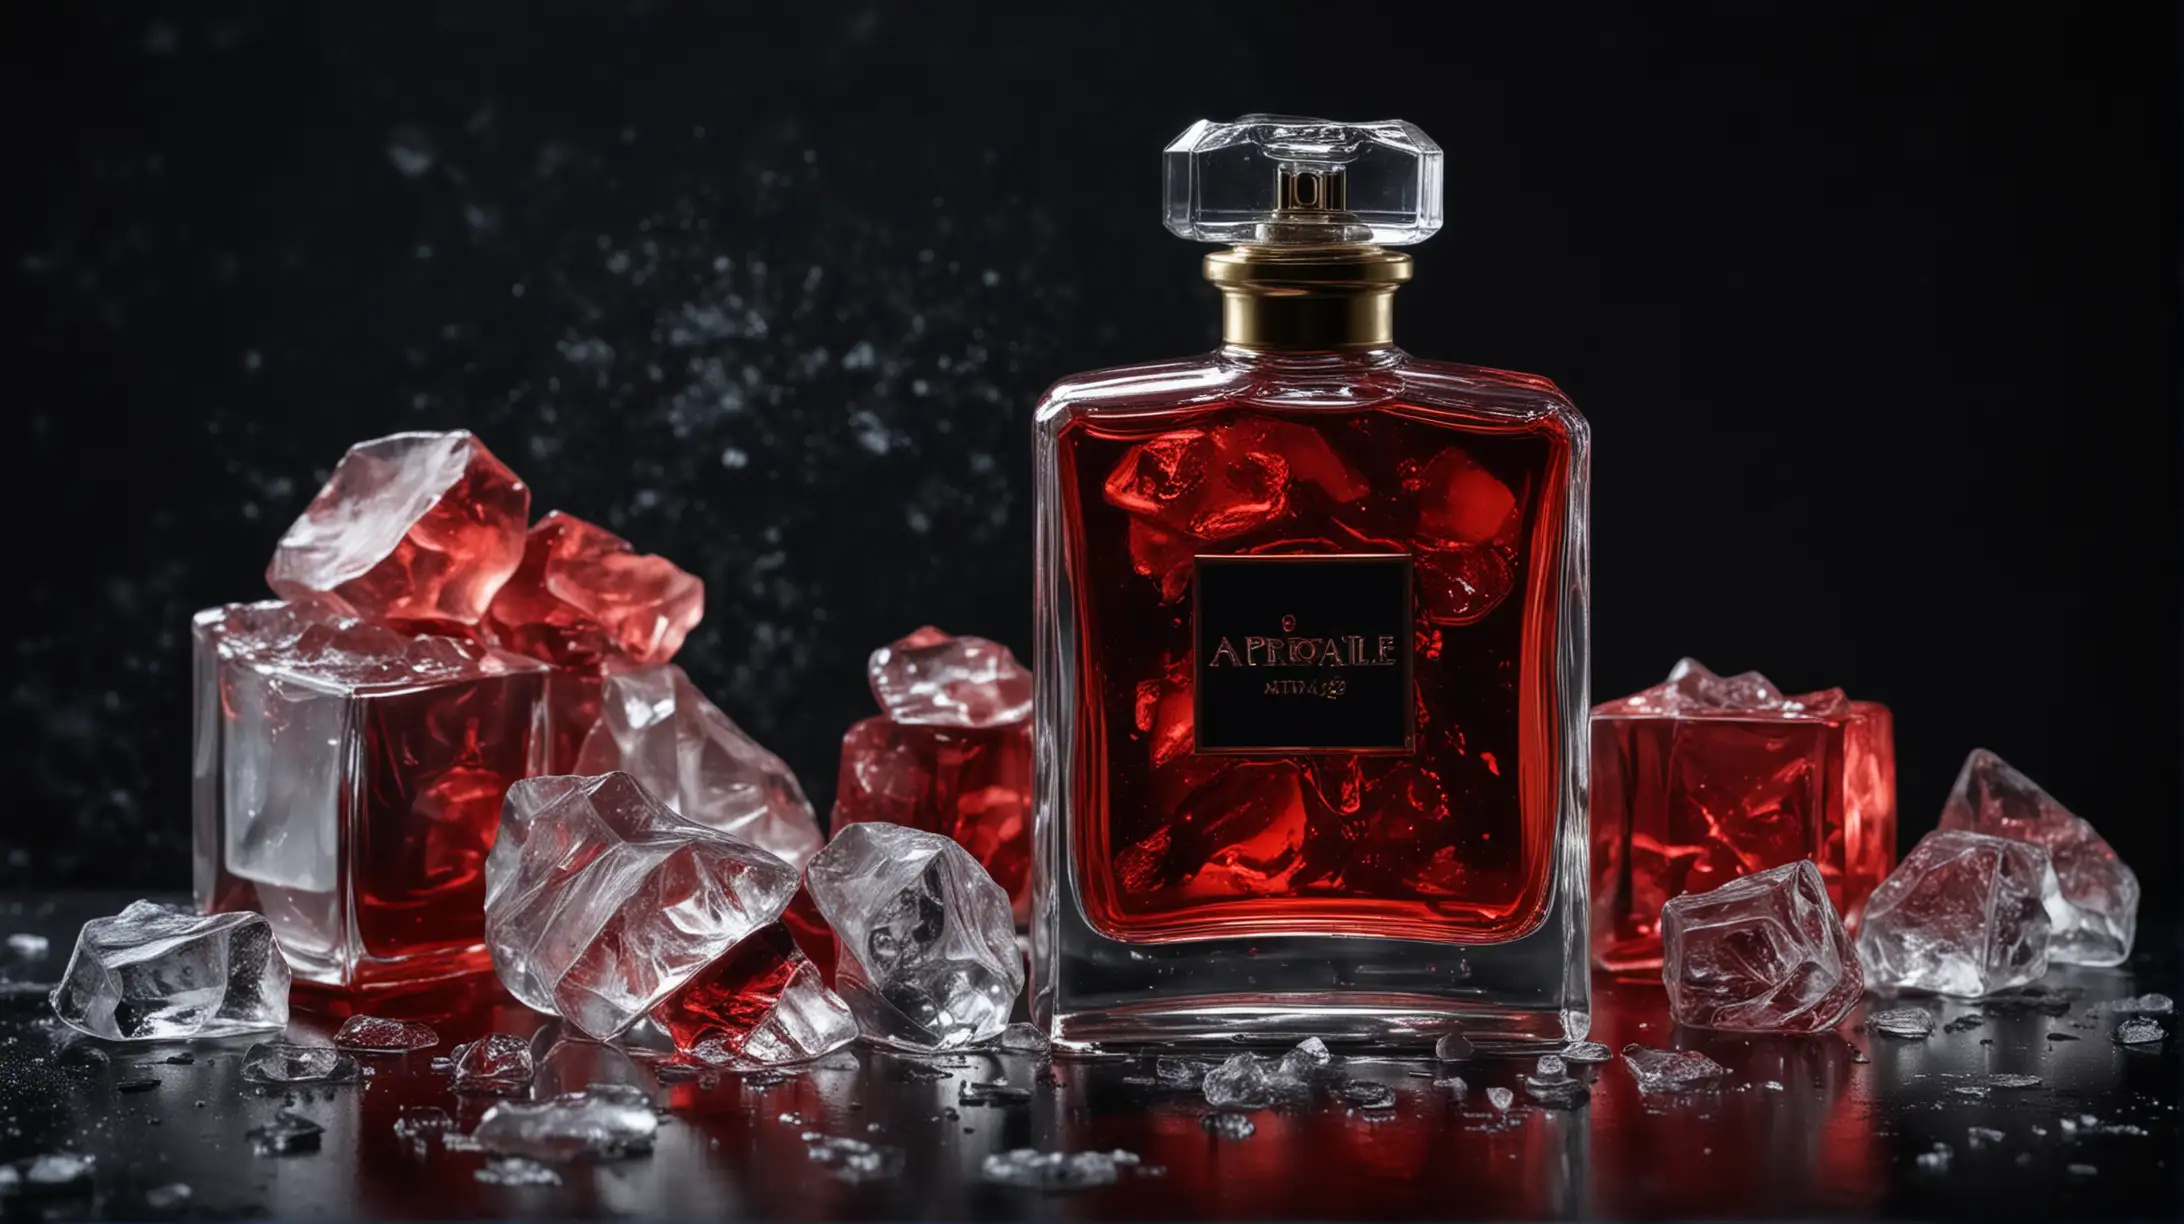 Still Life Picture of Perfume Bottle and Ice Objects with Red Fluid